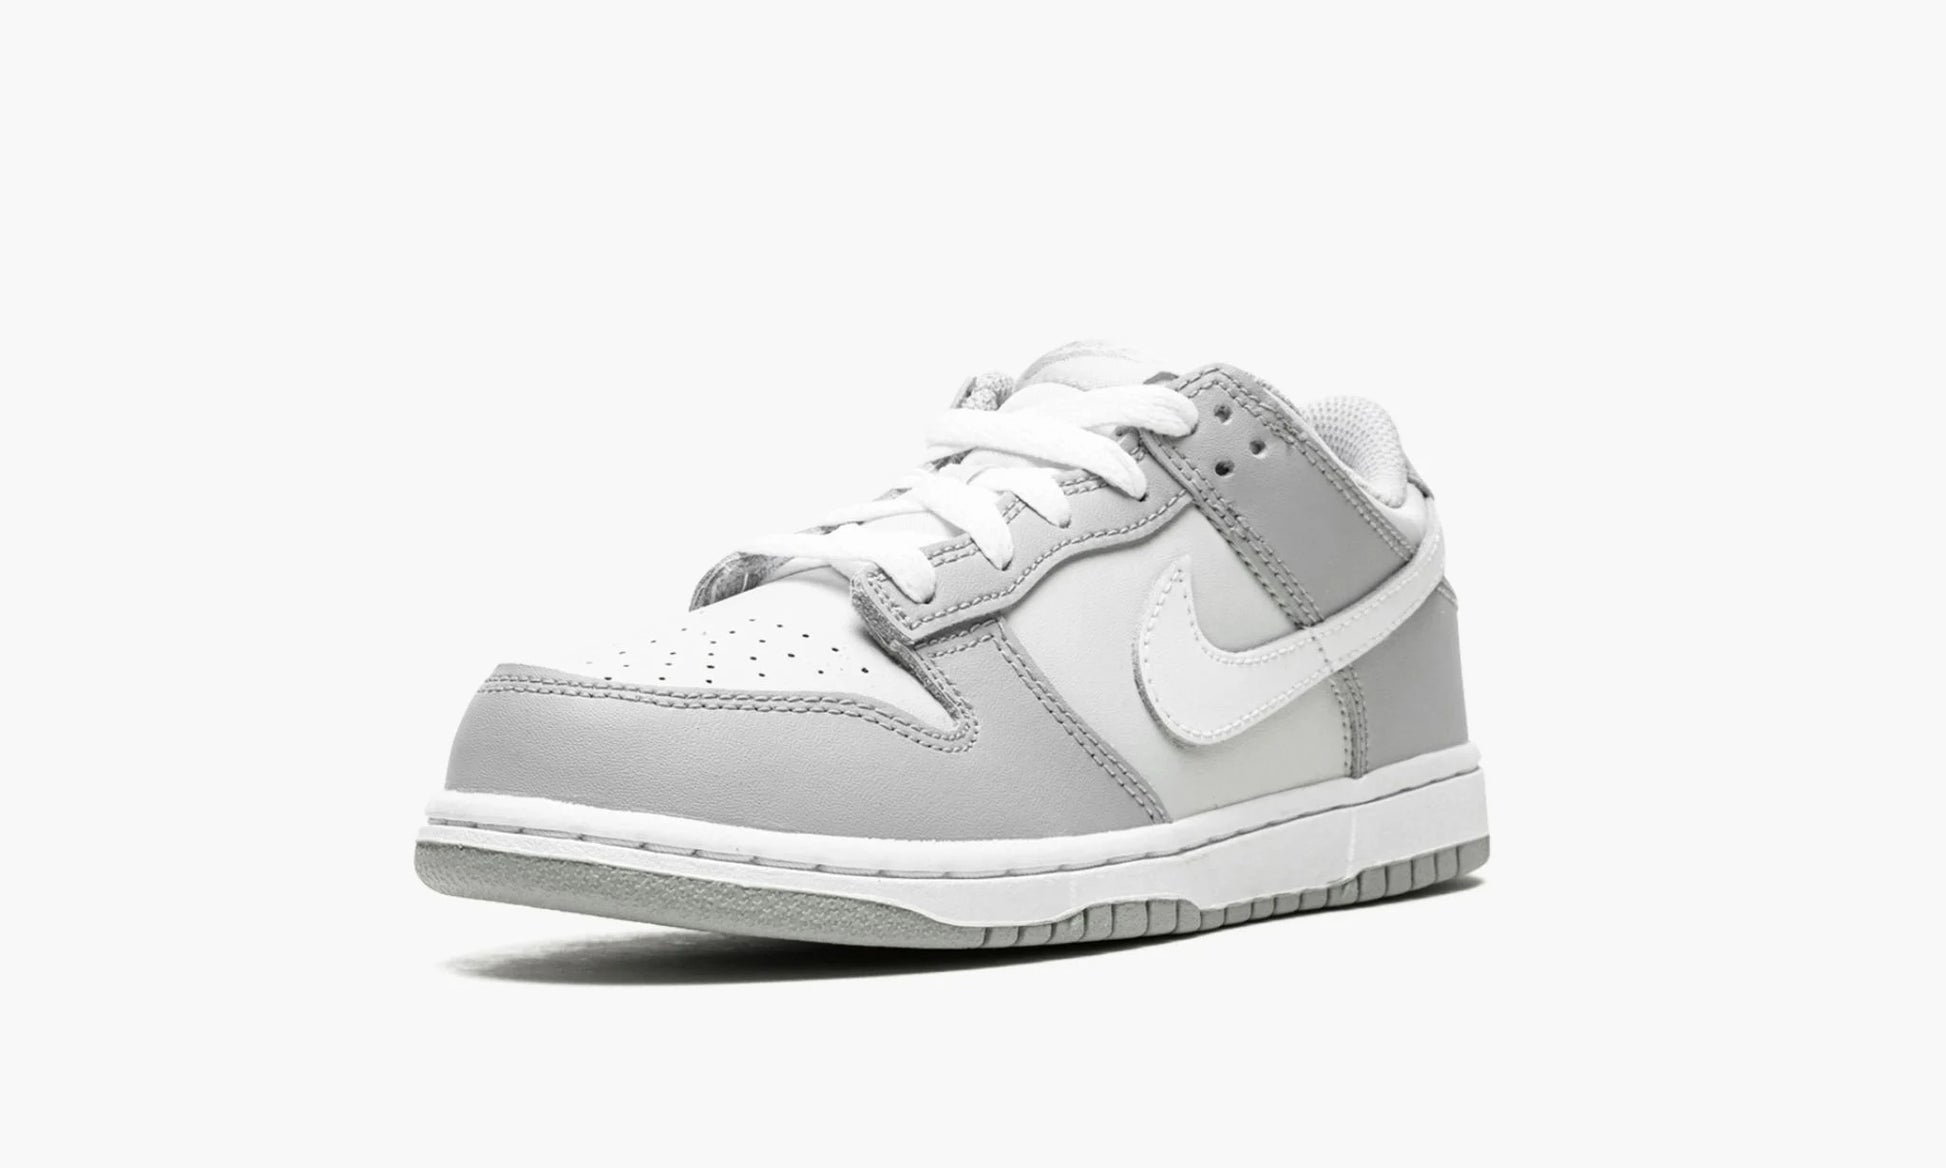 Dunk Low PS Two-Toned Grey - DH9756 001 | The Sortage